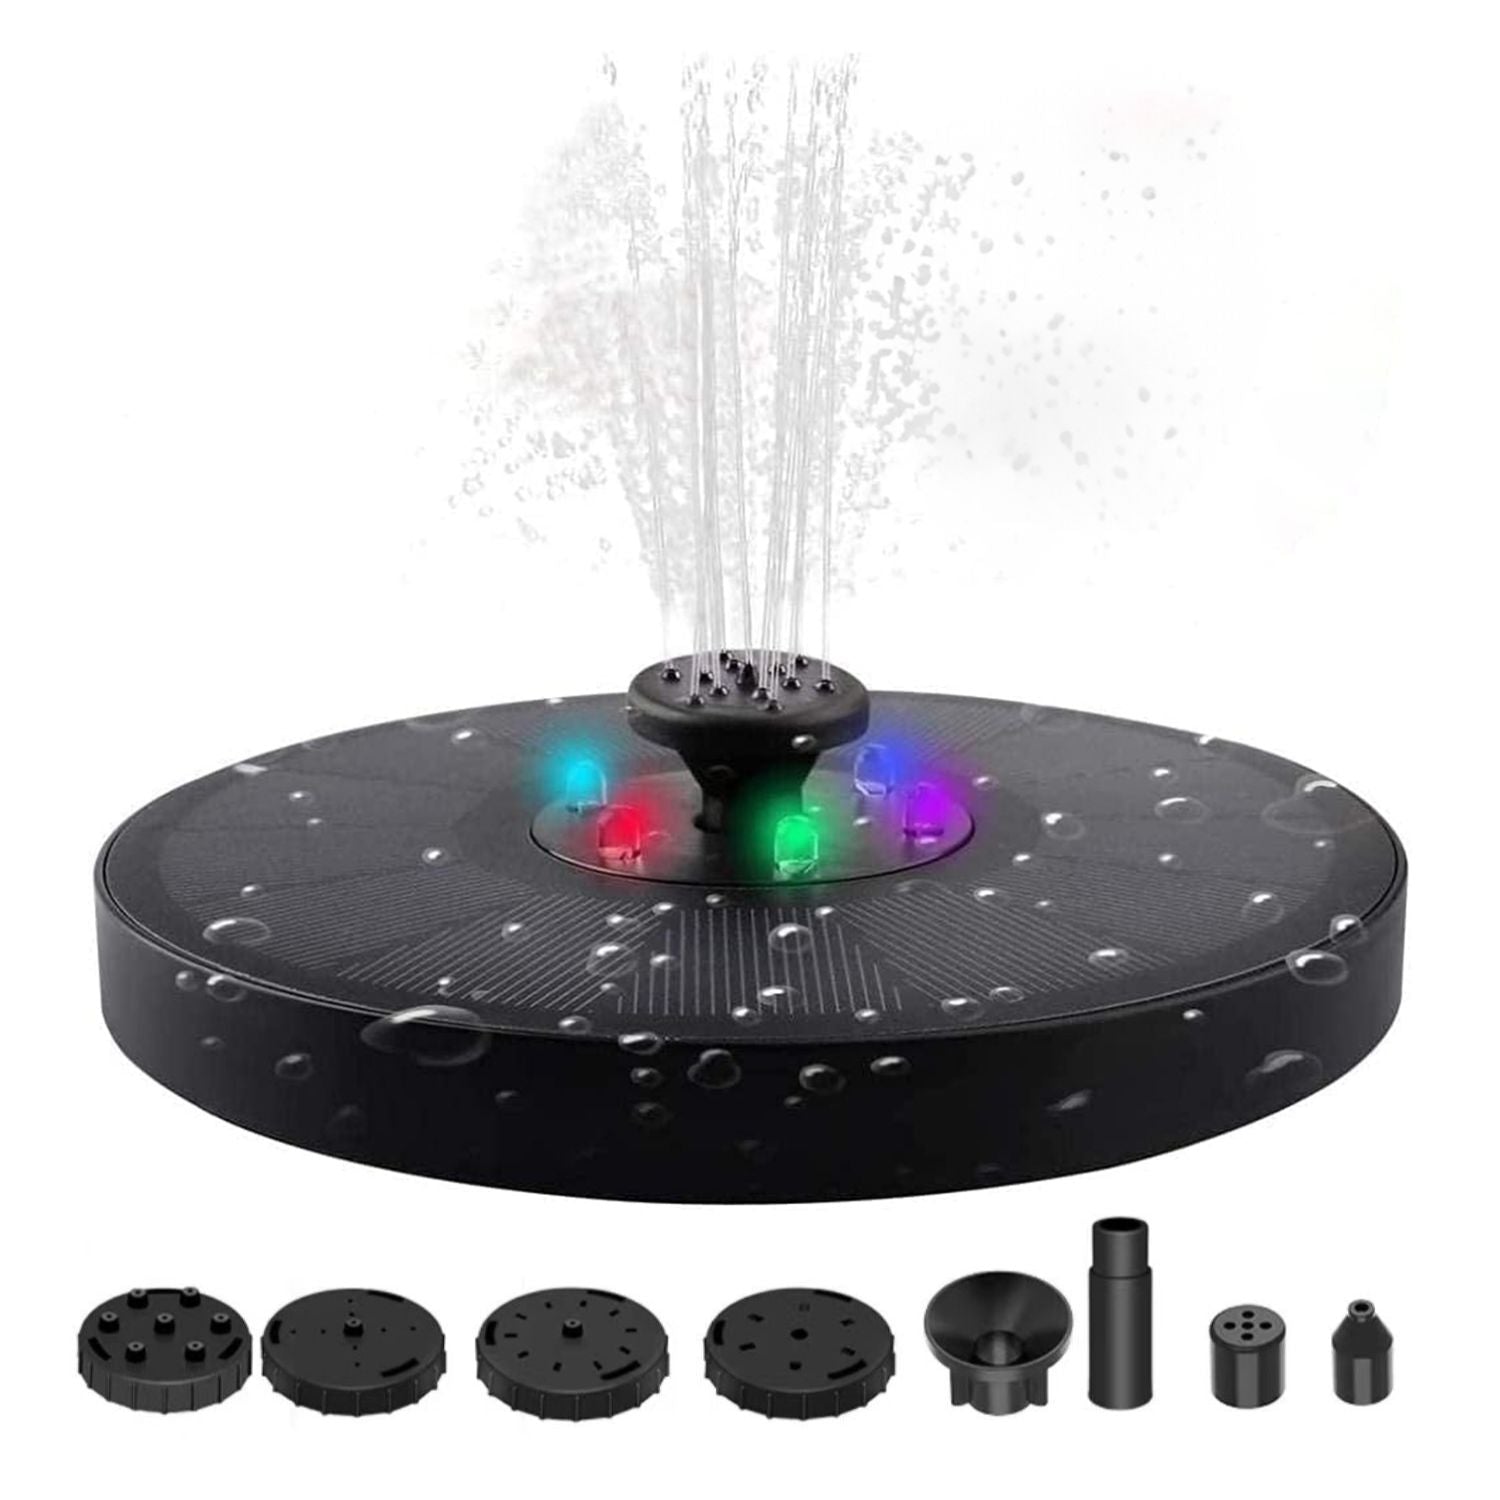 NOVEDEN Solar Fountain Water Pump for Bird Bath with RGB Color LED Lights (Black)